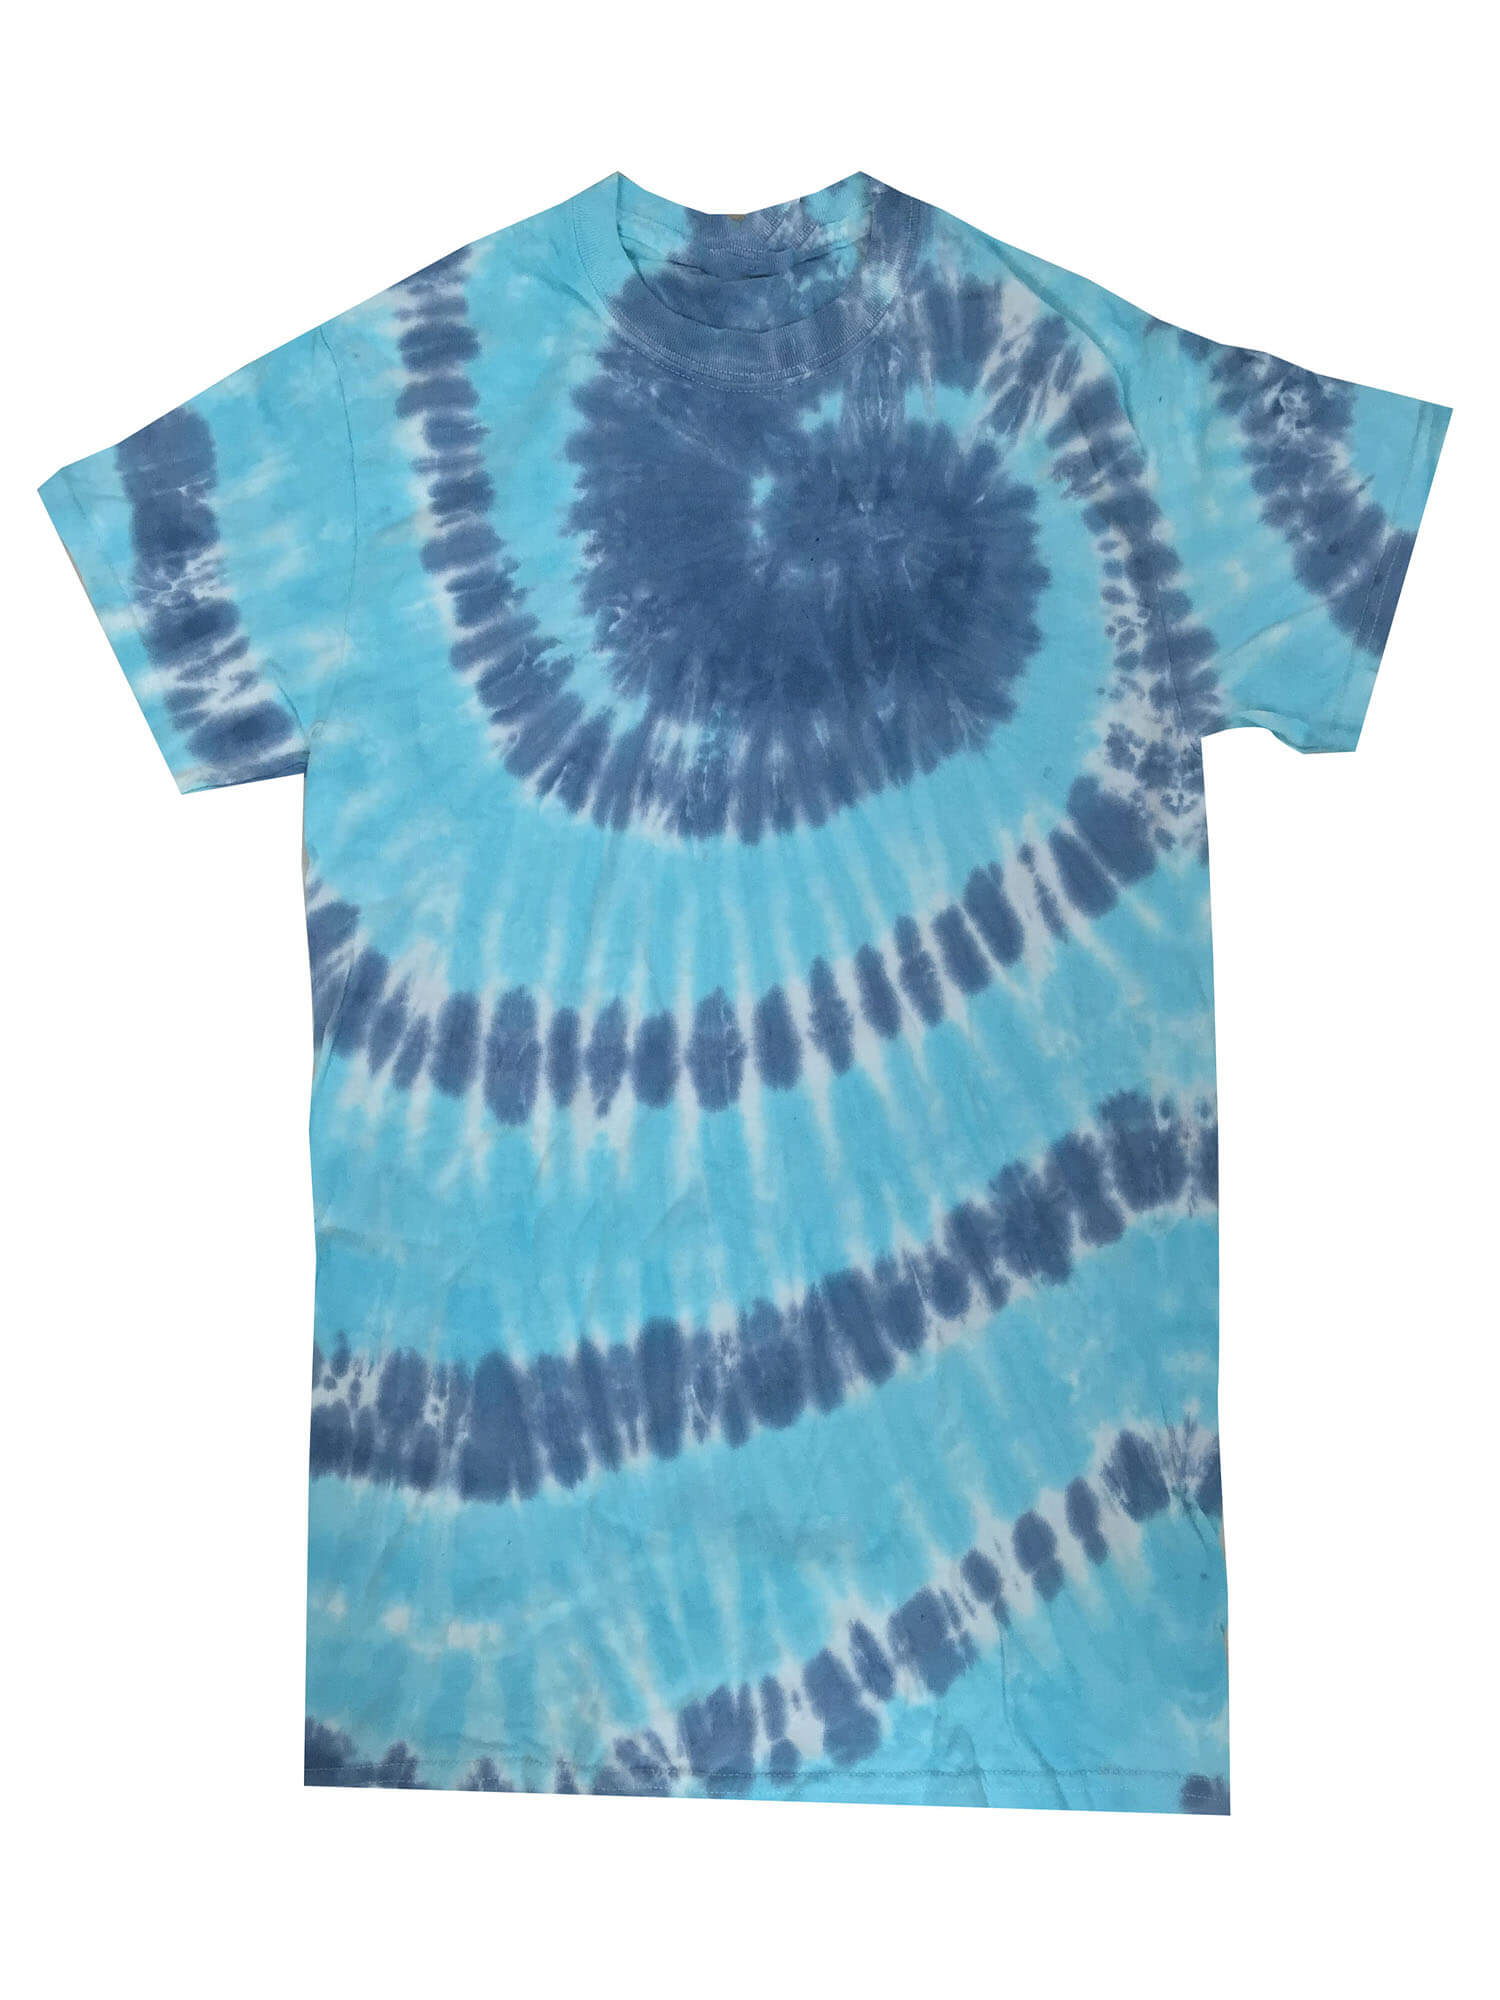 Coral Reef Tie Dye T-Shirts Adult | Zandy's Bargains